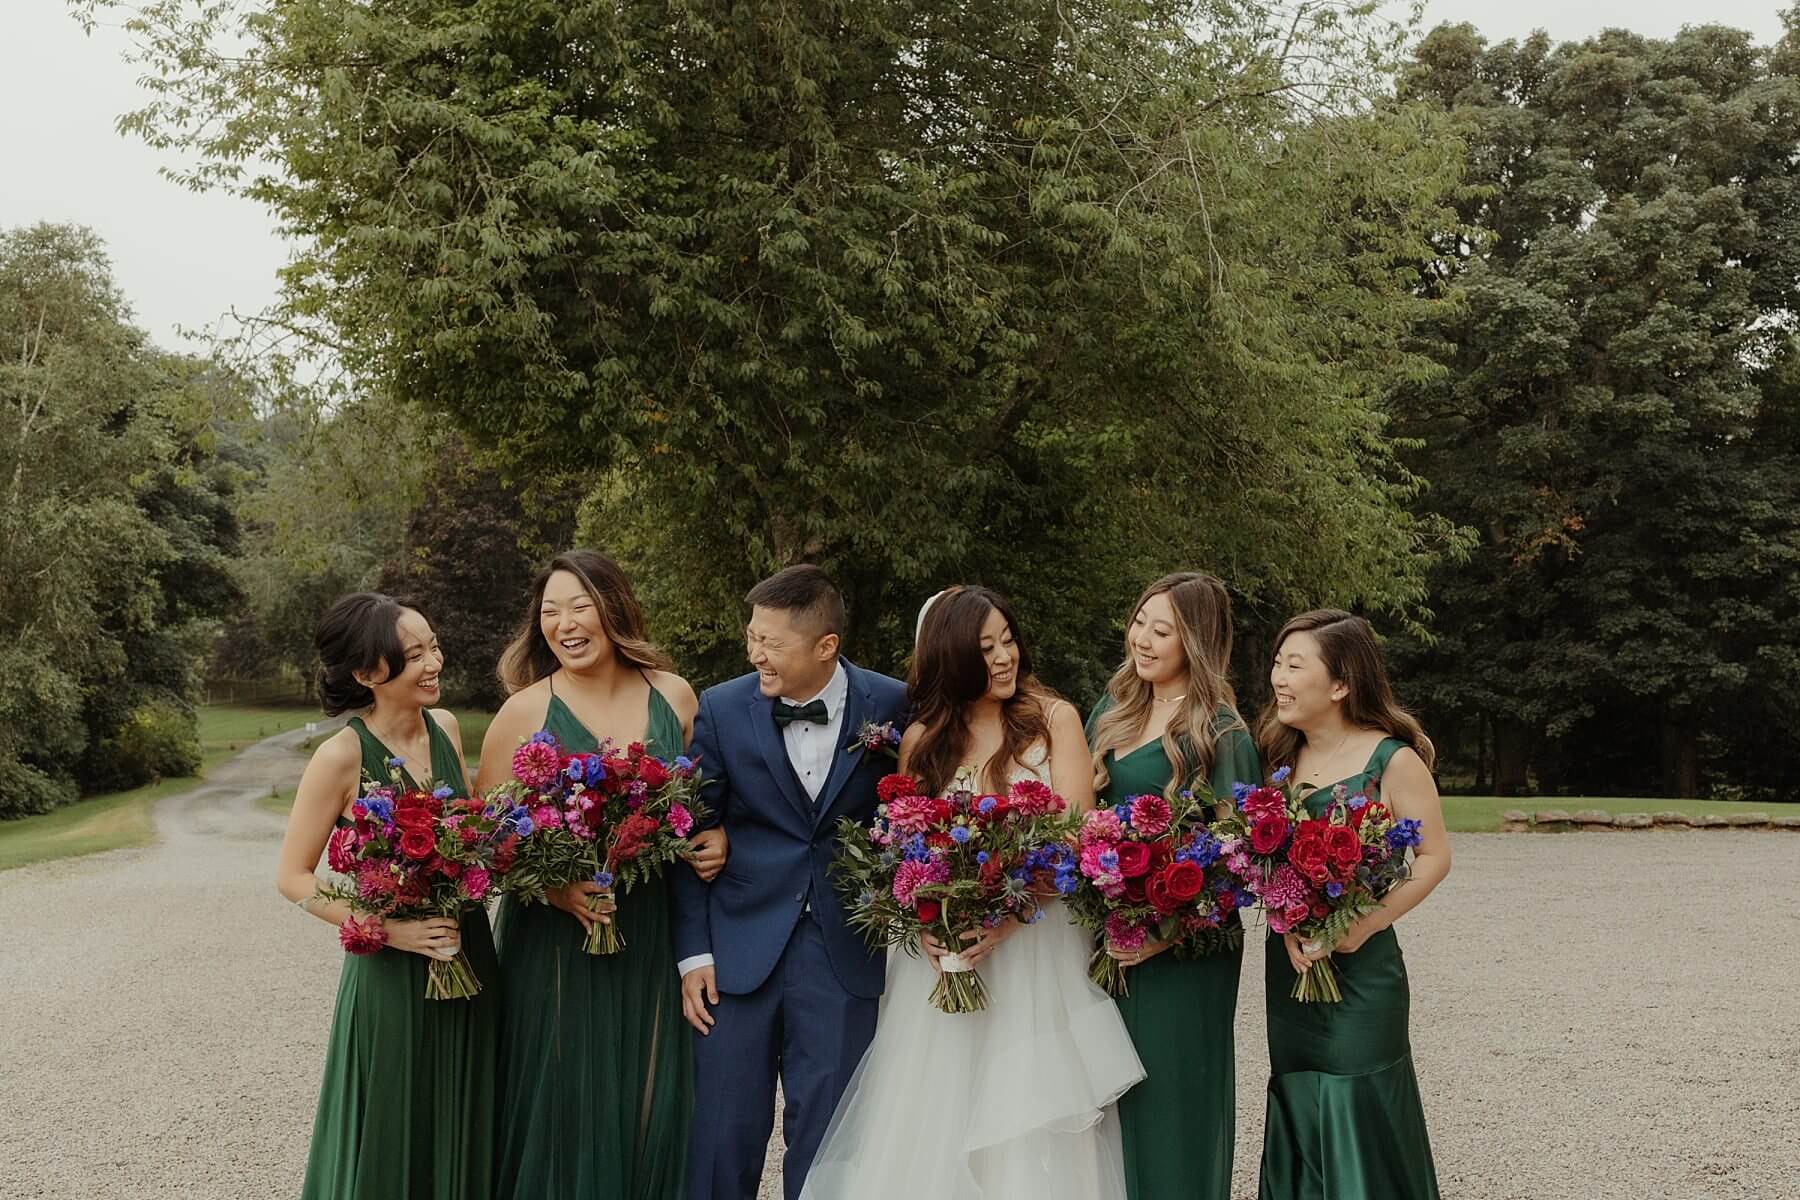 american bride and groom pose with wedding party bridesmaids in green silk dresses at cluny castle wedding scotland